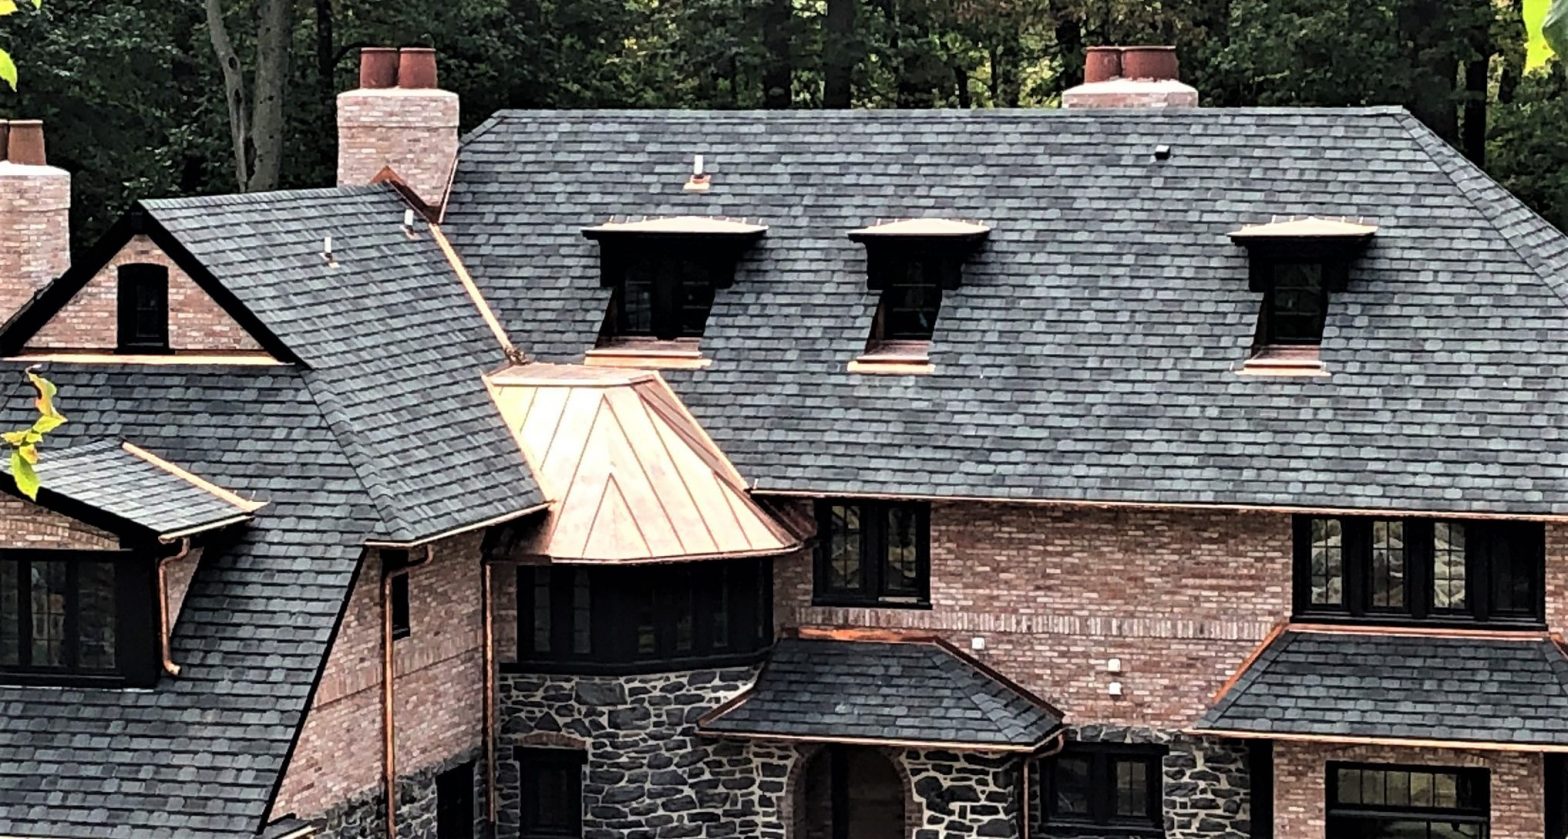 A roof made of shingles and copper